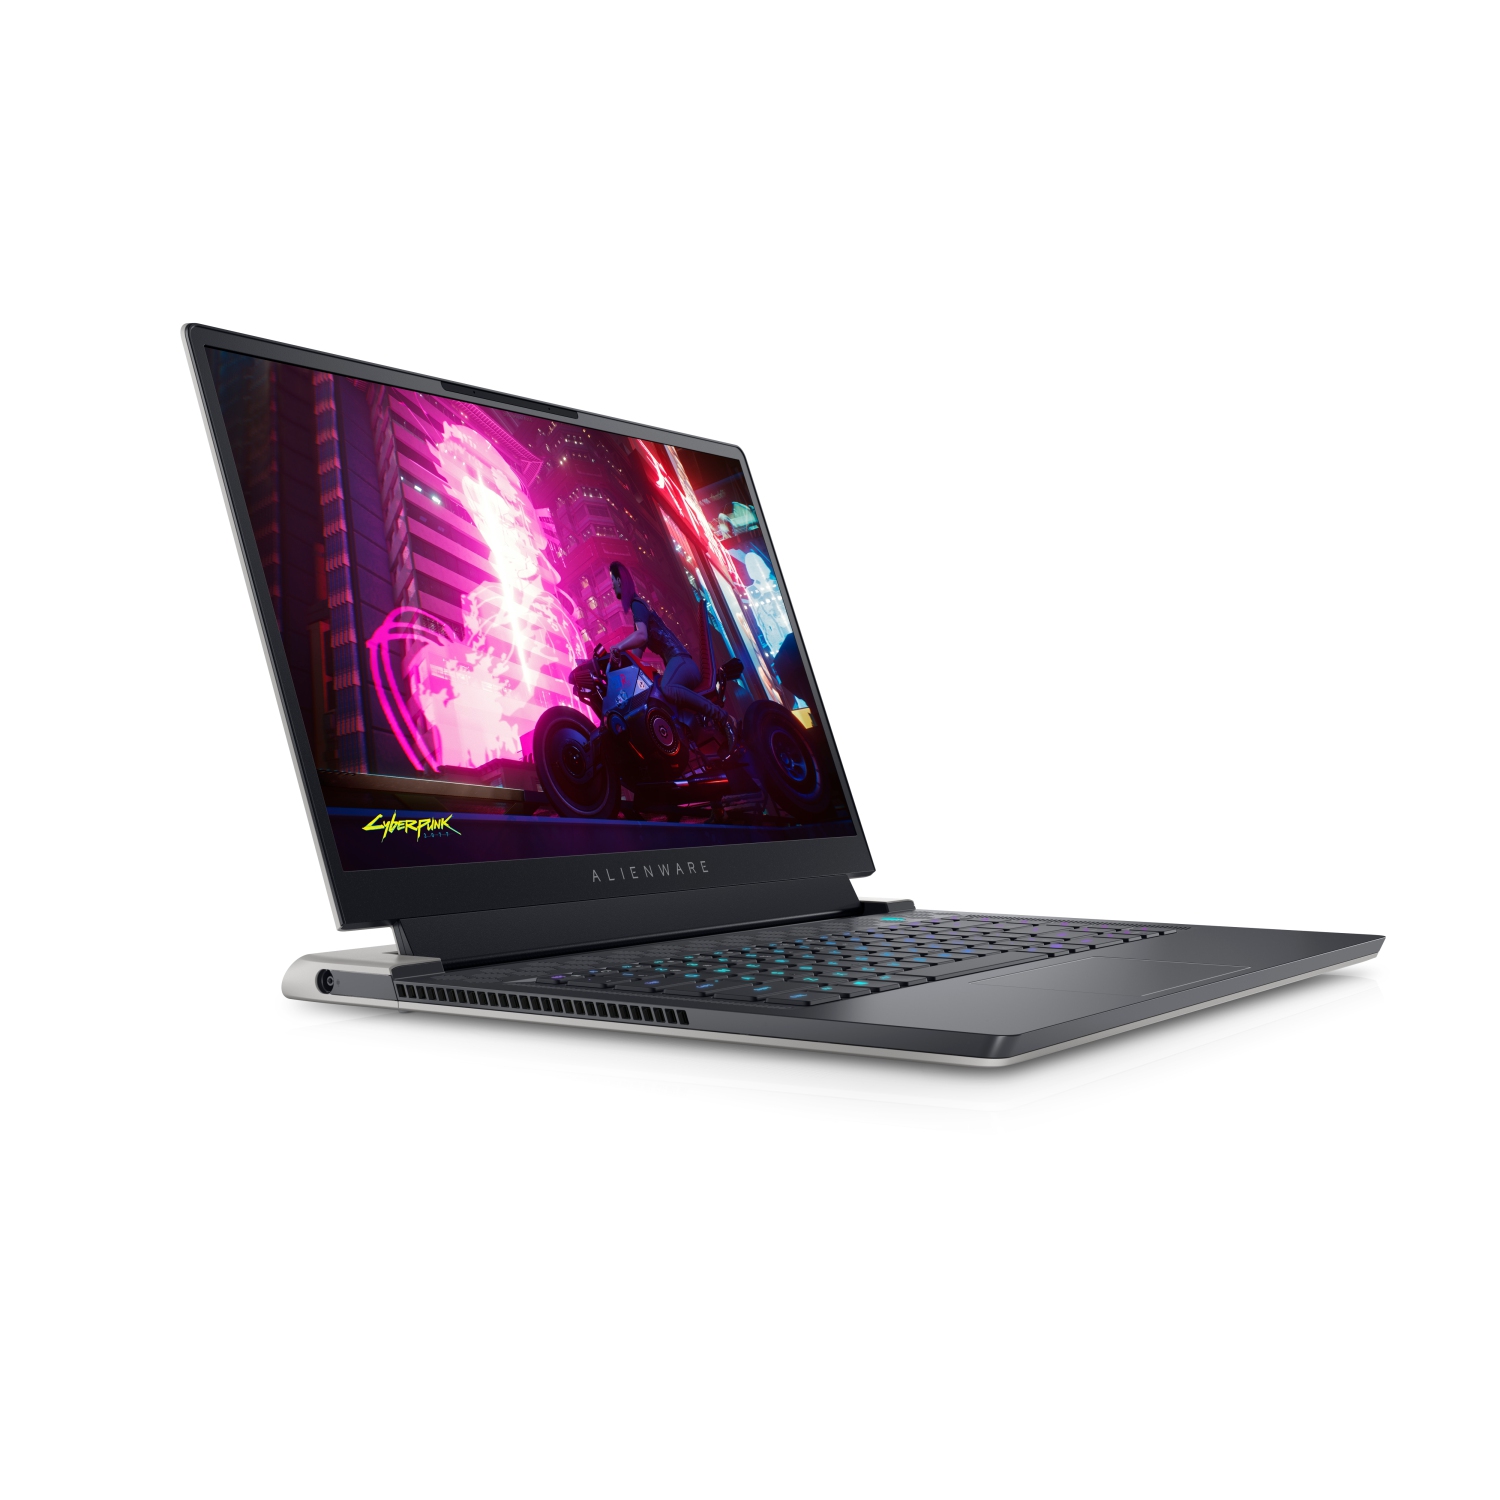 Refurbished (Excellent) – Dell Alienware X15 R1 Gaming Laptop (2021) | 15.6" FHD | Core i7 - 512GB SSD - 16GB RAM - RTX 3070 | 8 Cores @ 4.6 GHz - 11th Gen CPU - 8GB GDDR6